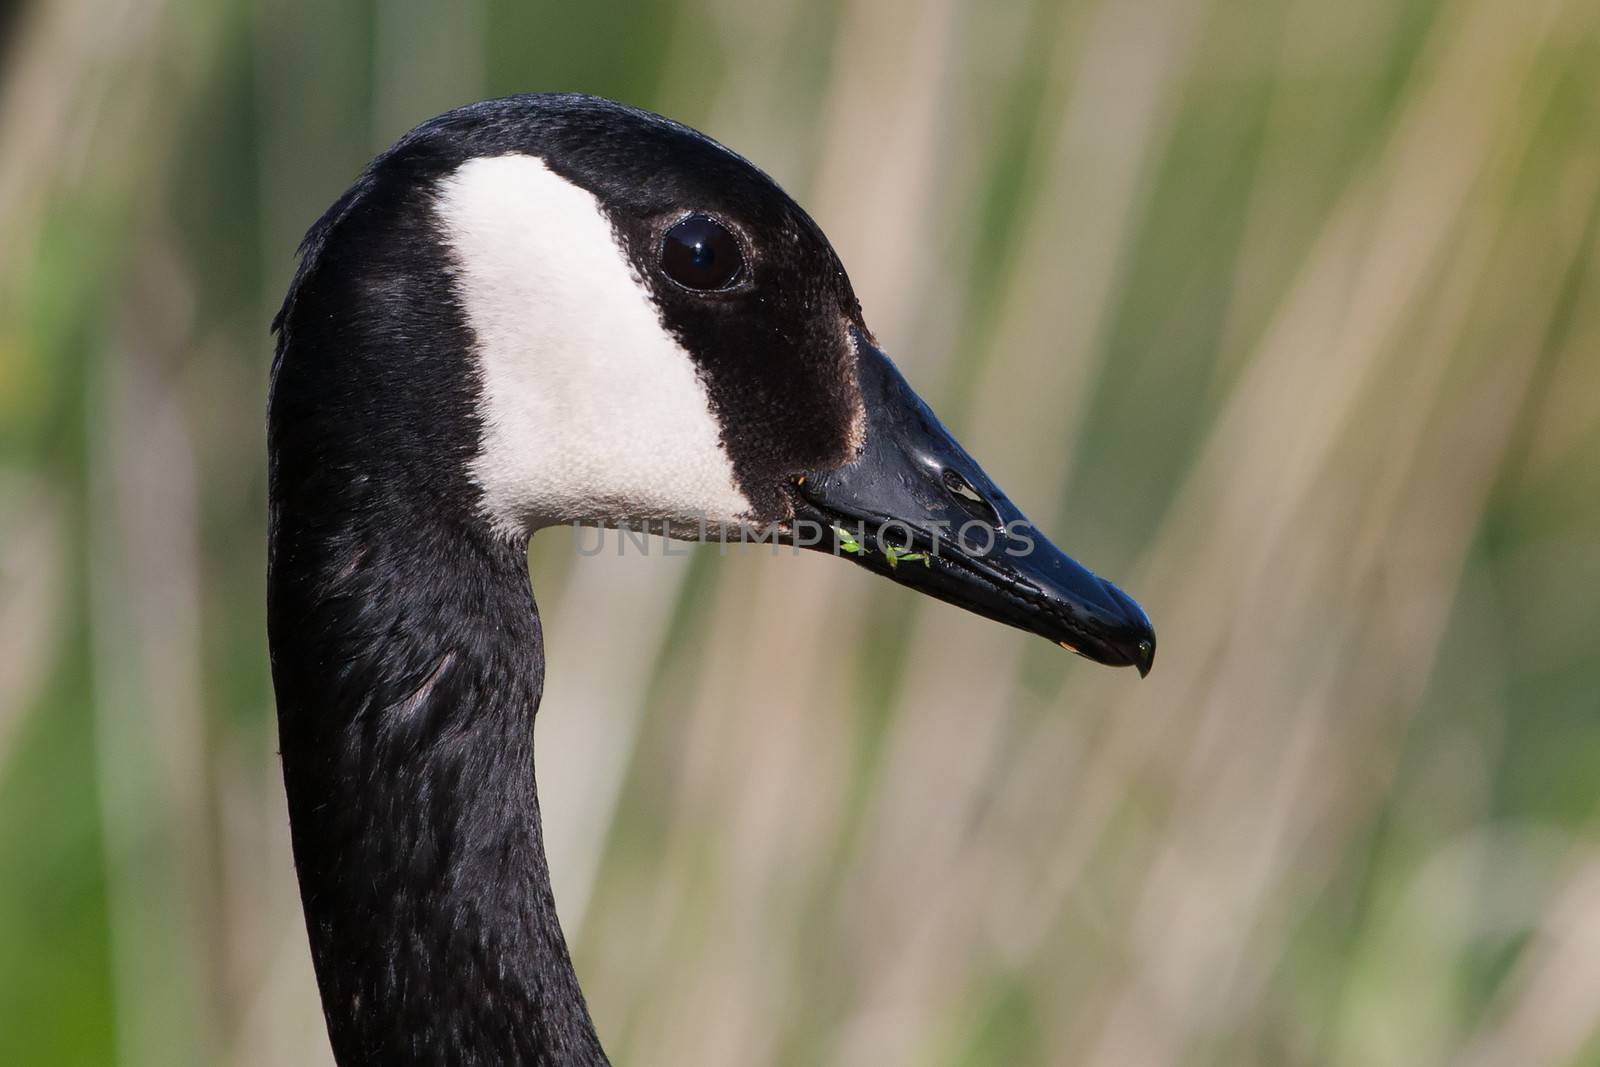 Canadian Goose stopped to pose for a picture.